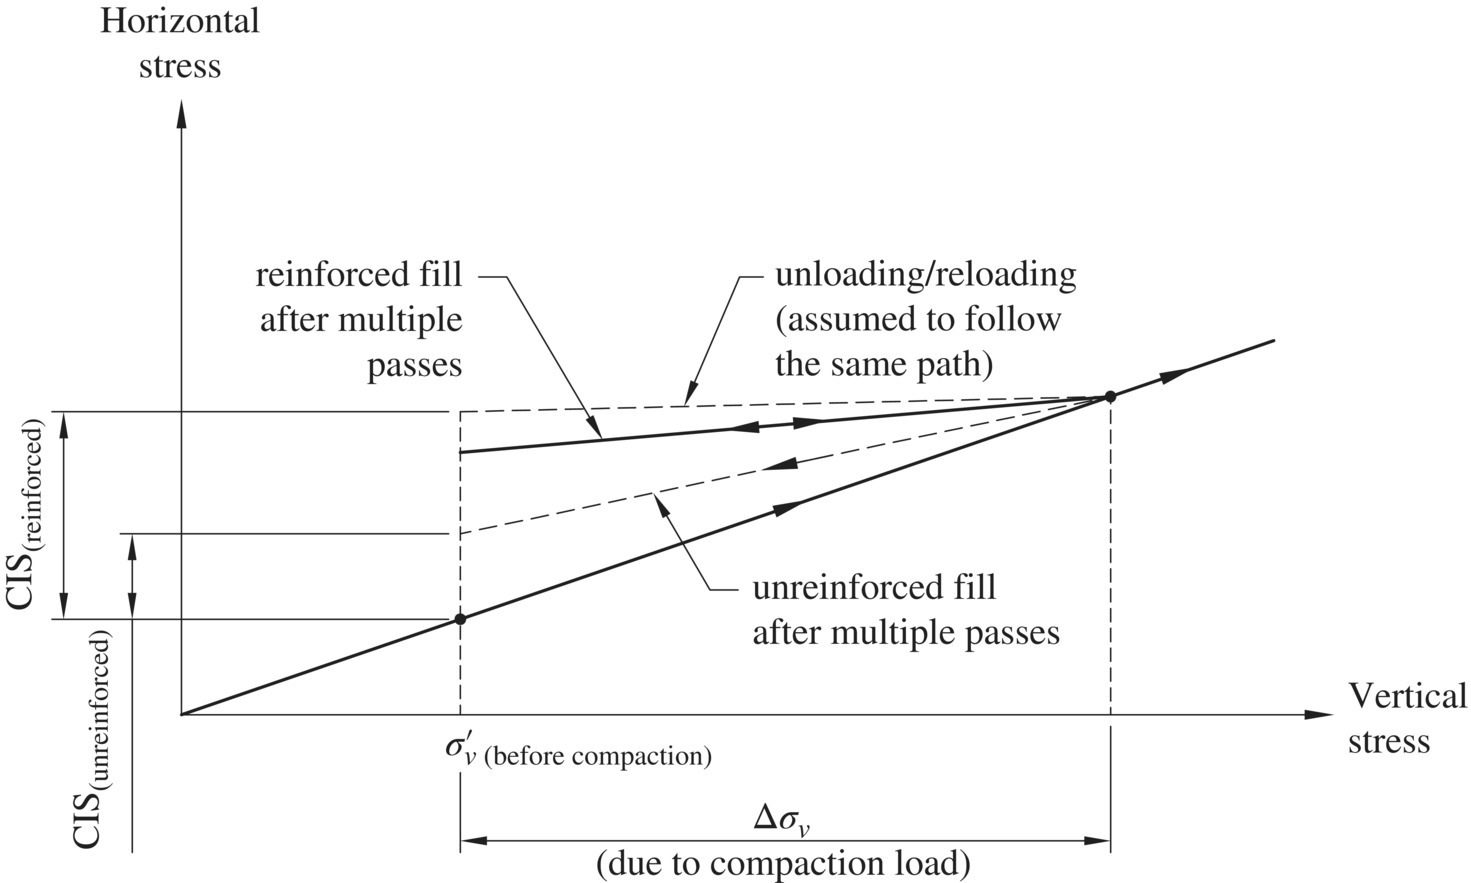 Graph of horizontal stress vs. vertical stress displaying an ascending line intersecting a dashed box labeled unloading/reloading, dashed line labeled unreinforced fill after multiple passes, etc.